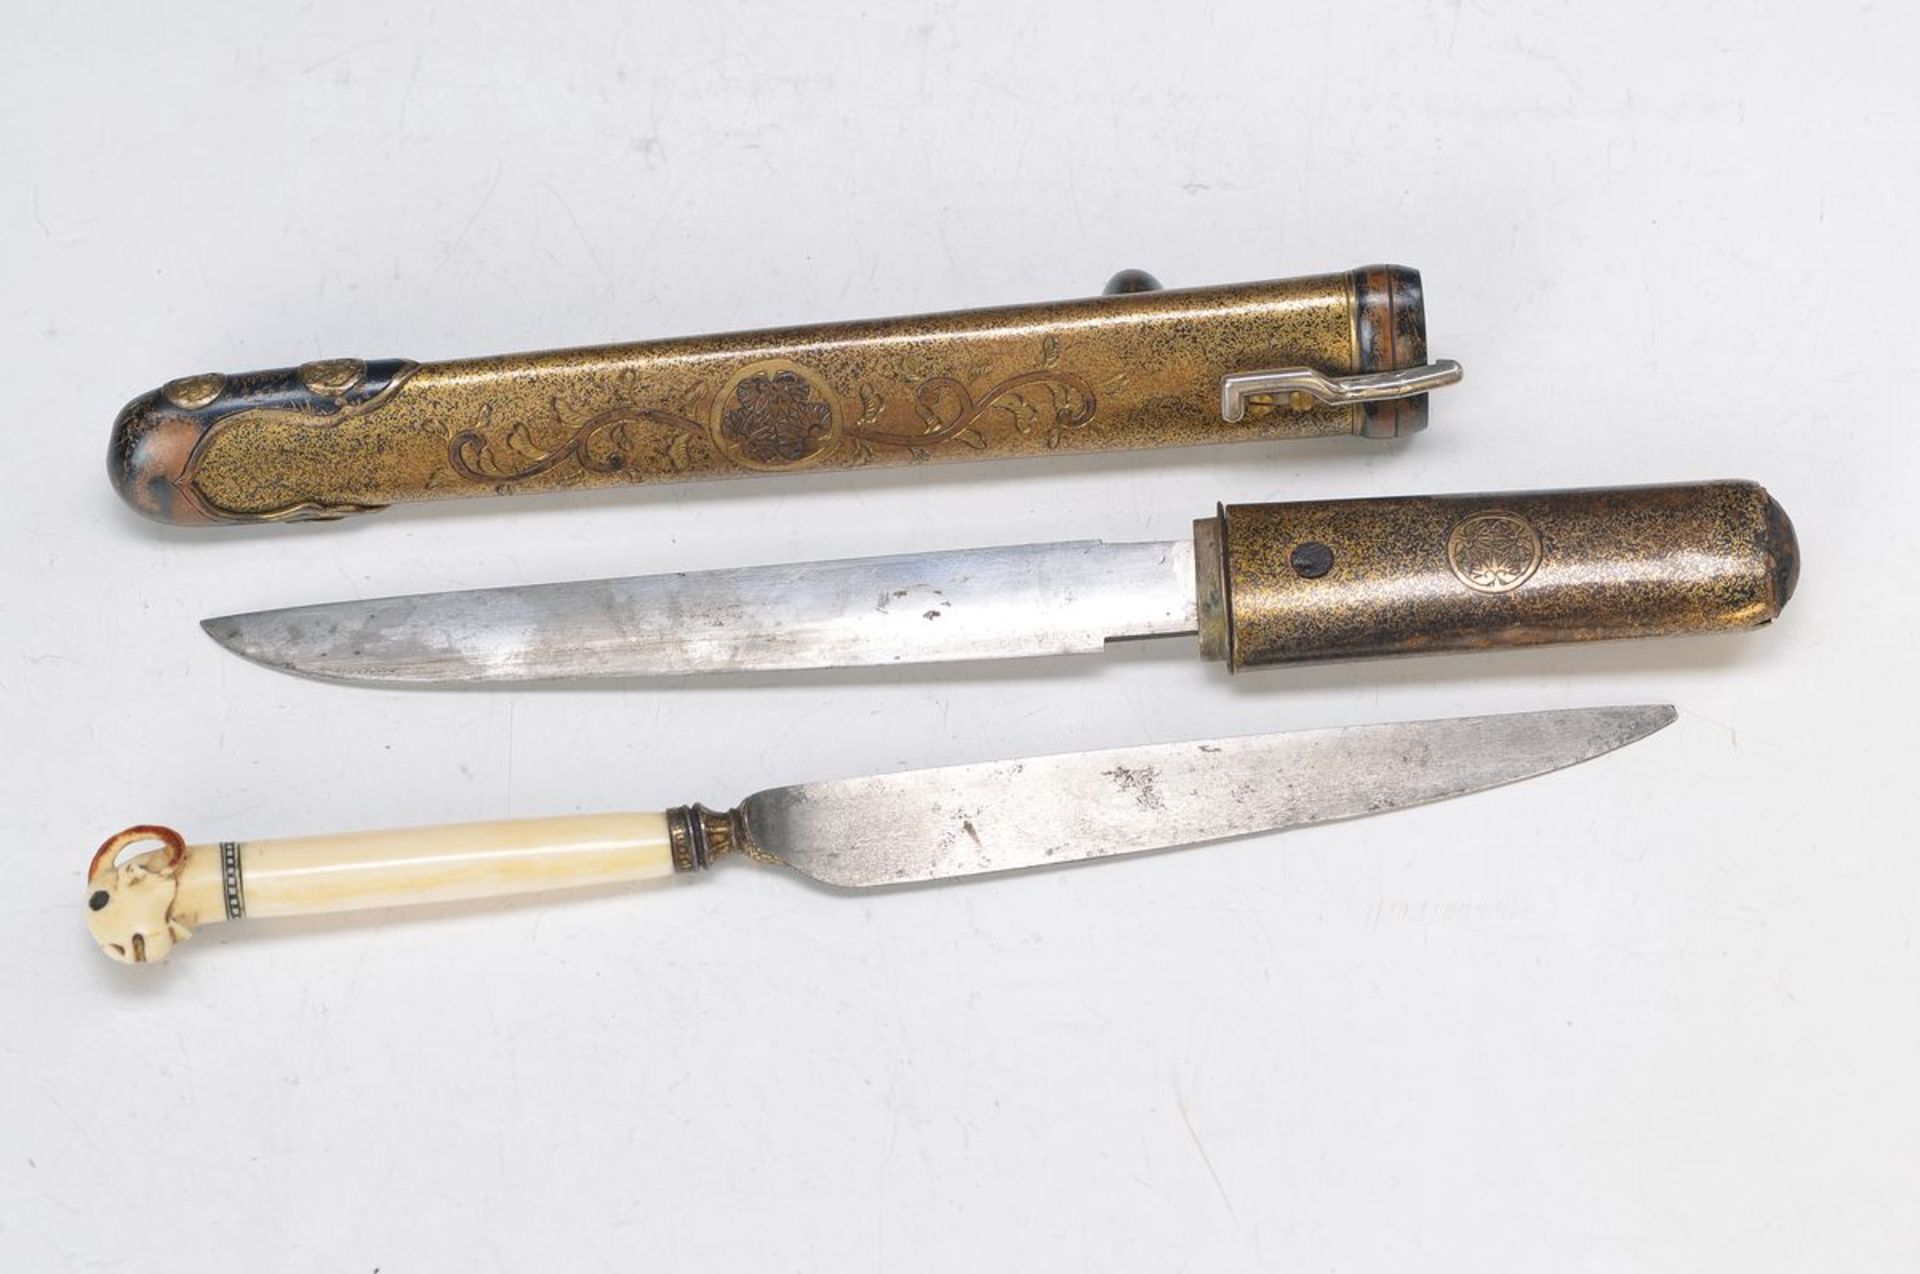 knives, Japan, around 1860-70, steel blade old but secondary, very beautiful handle and sheath